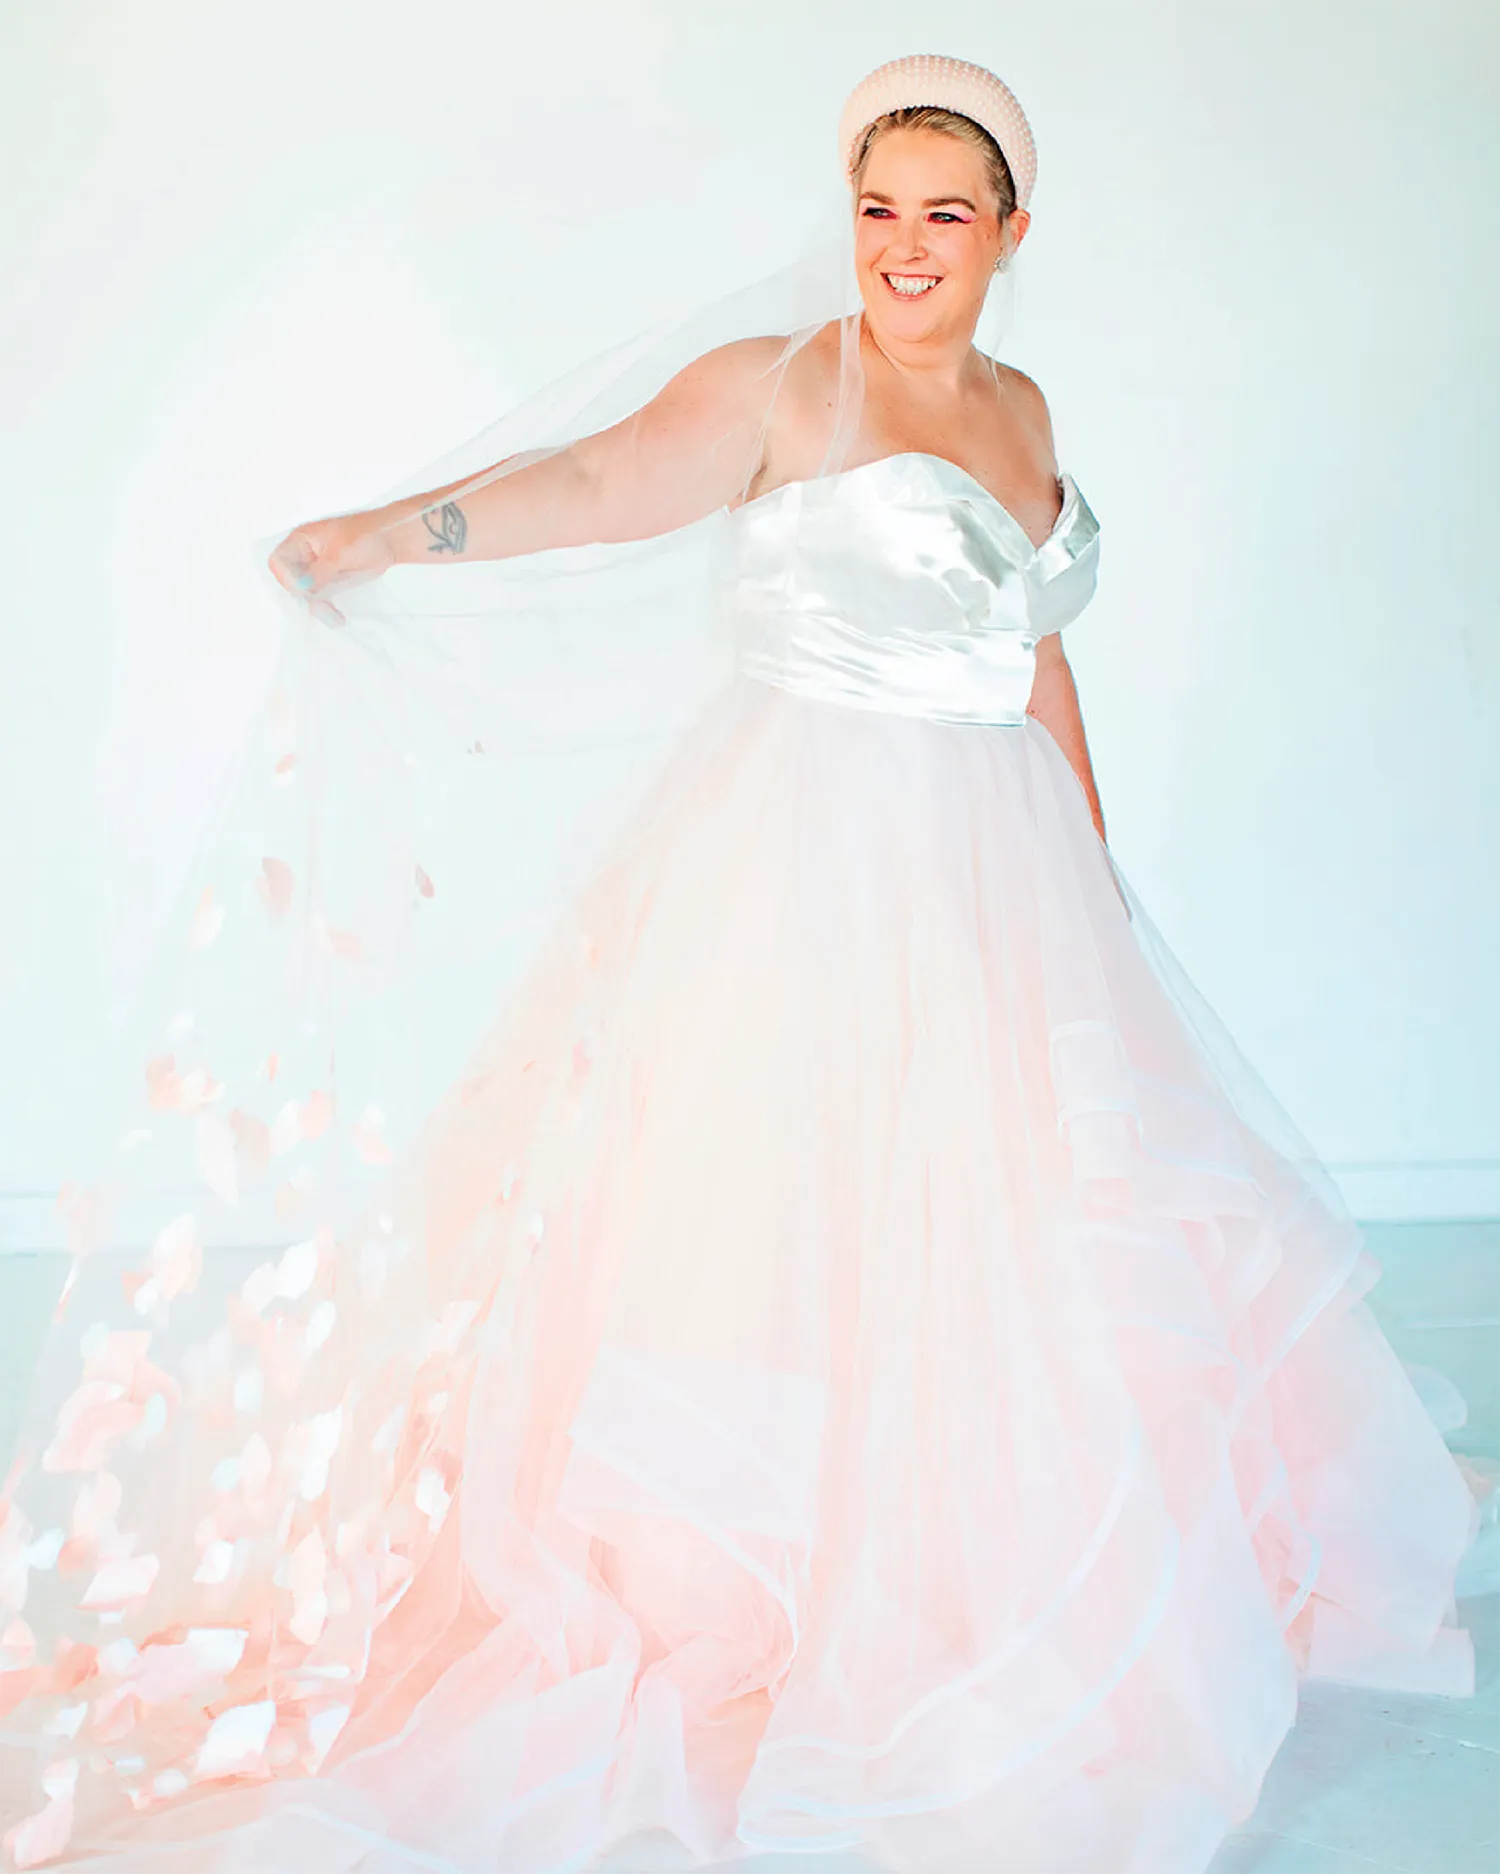 woman smiling and wearing colorful wedding dress